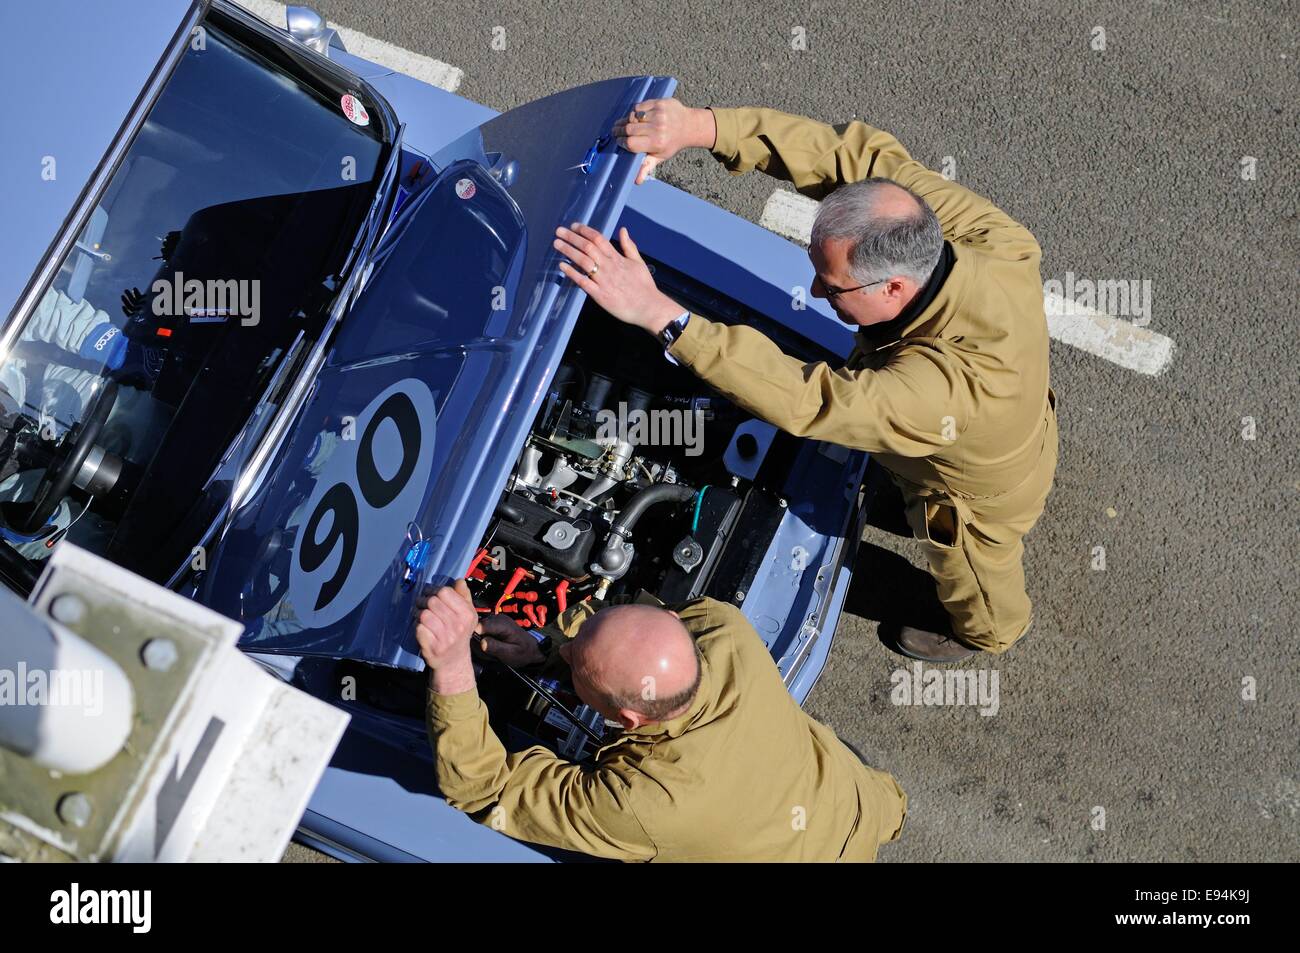 Overhead shot of two mechanics in the pit lane at Goodwood opening up the bonnet of a Fiat classic racing car. Stock Photo